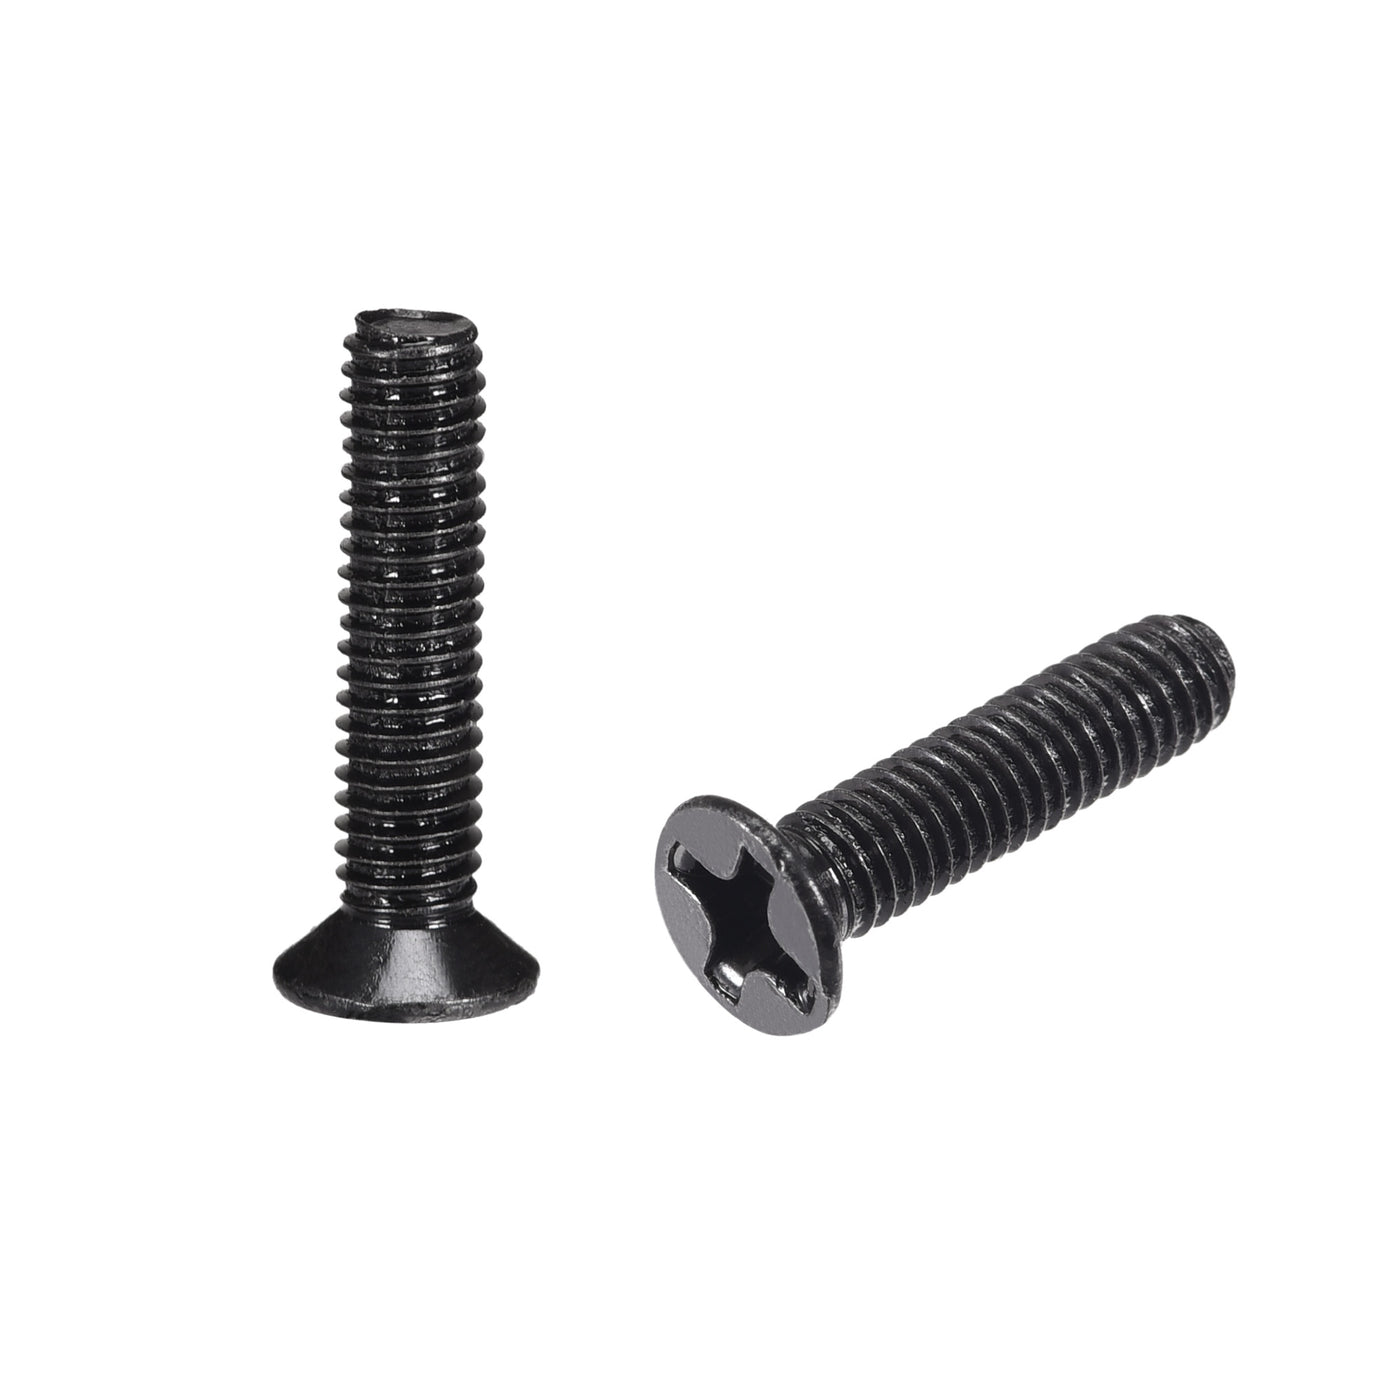 uxcell Uxcell M3 x 14mm Phillips Flat Head Screws Carbon Steel Machine Screws Black for Home Office Computer Case Appliance Equipment 150pcs